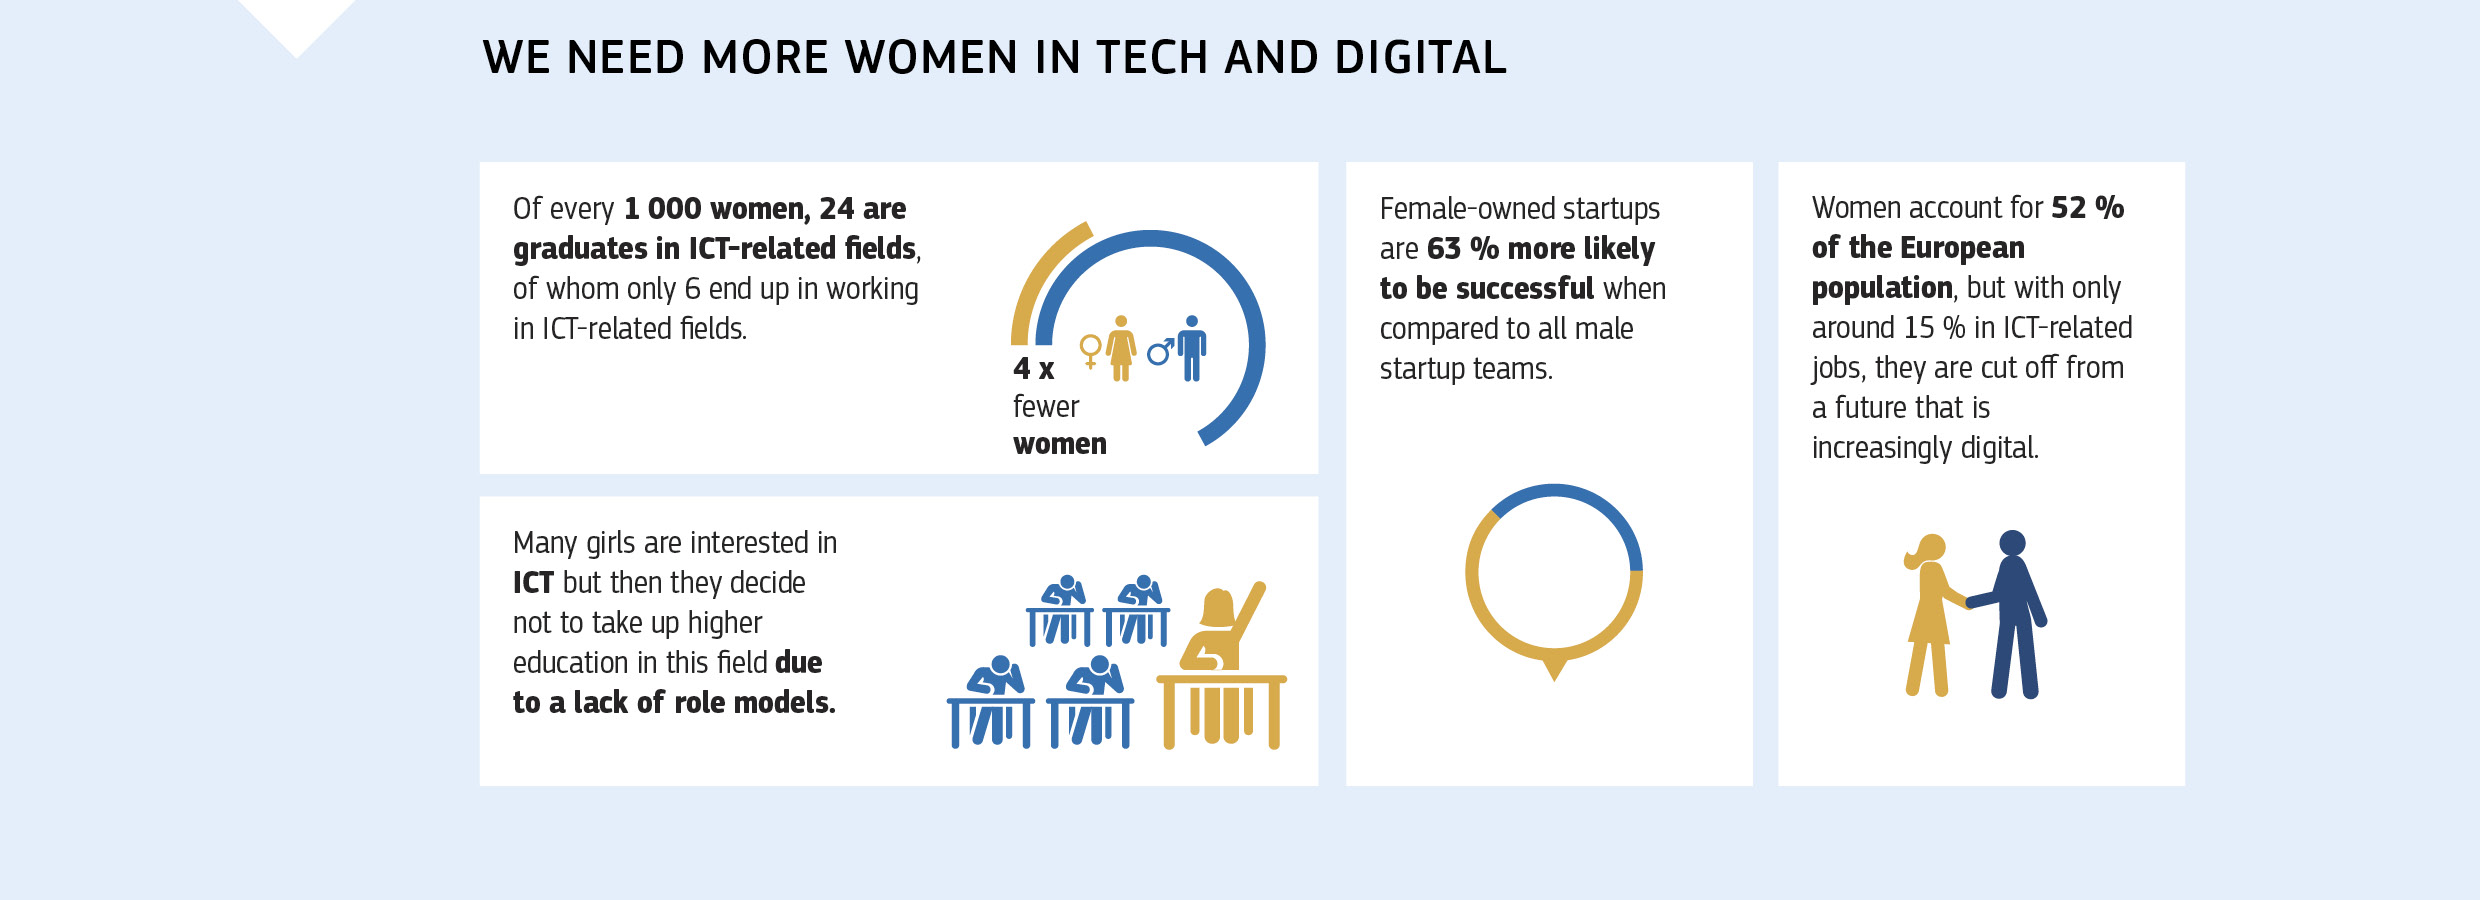 WE NEED MORE WOMEN IN TECH AND DIGITAL